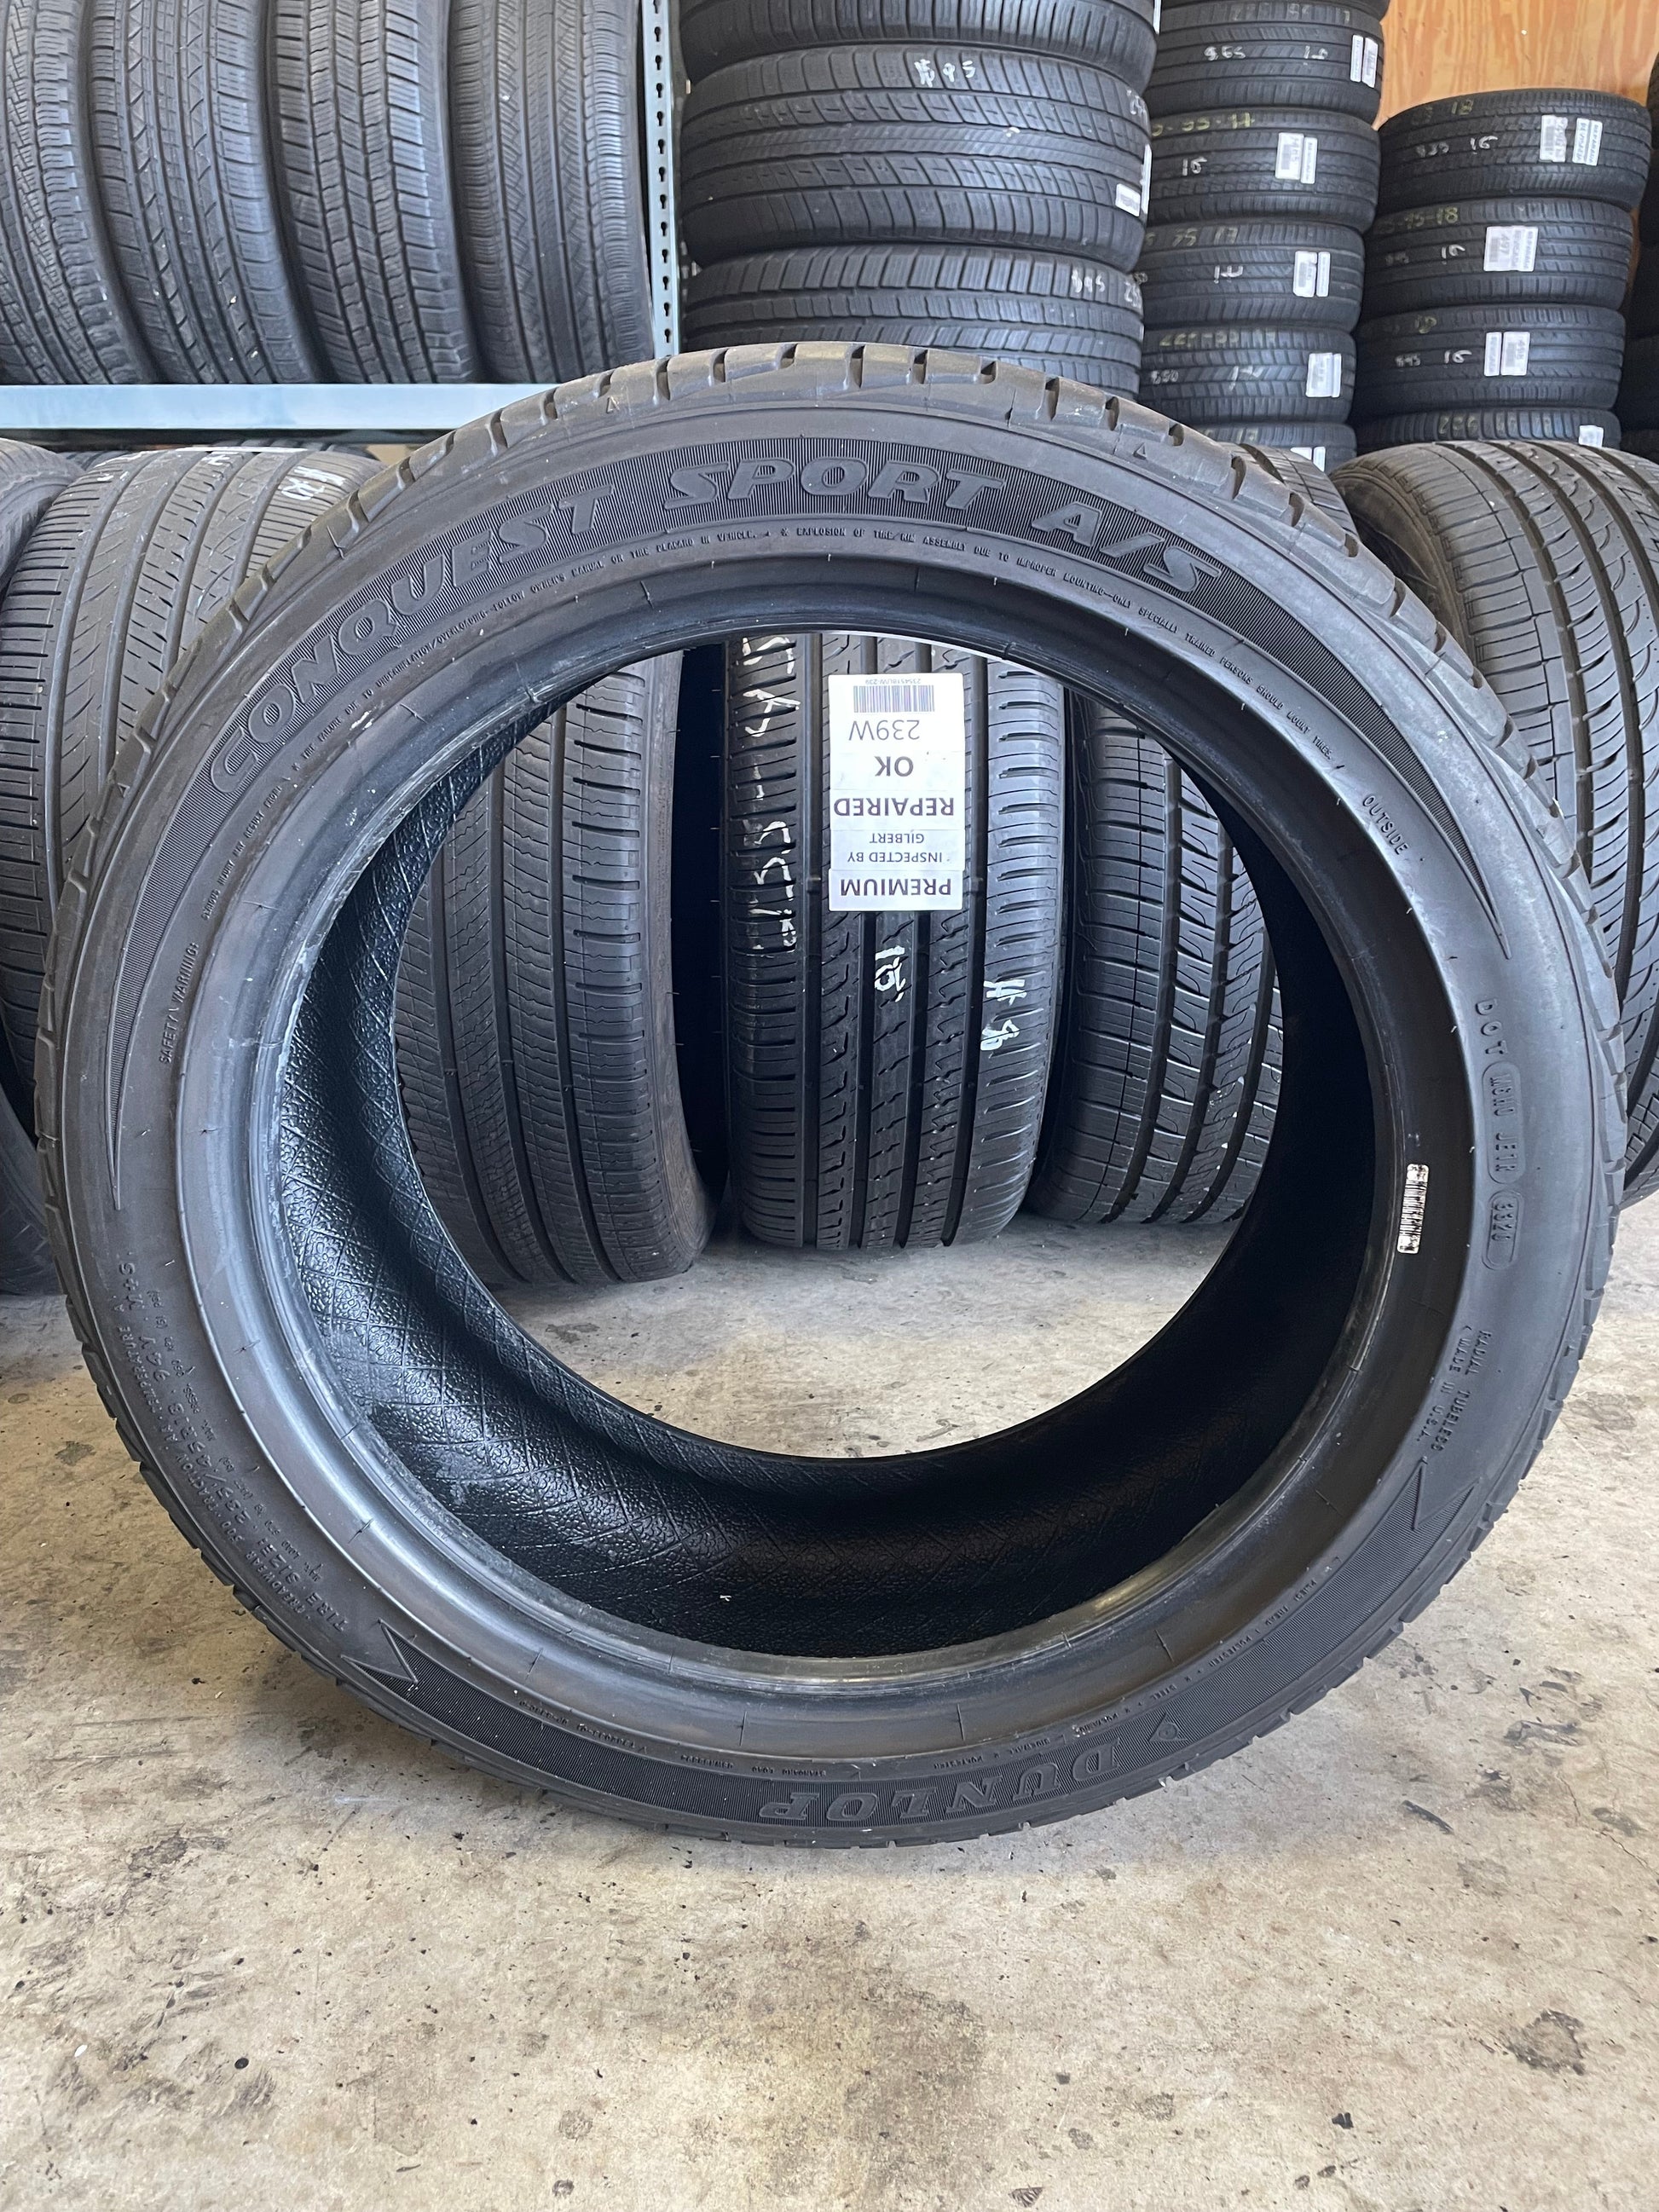 SINGLE 235/45R18 Dunlop Conquest Sport A/S 94 V SL - Premium Used Tires